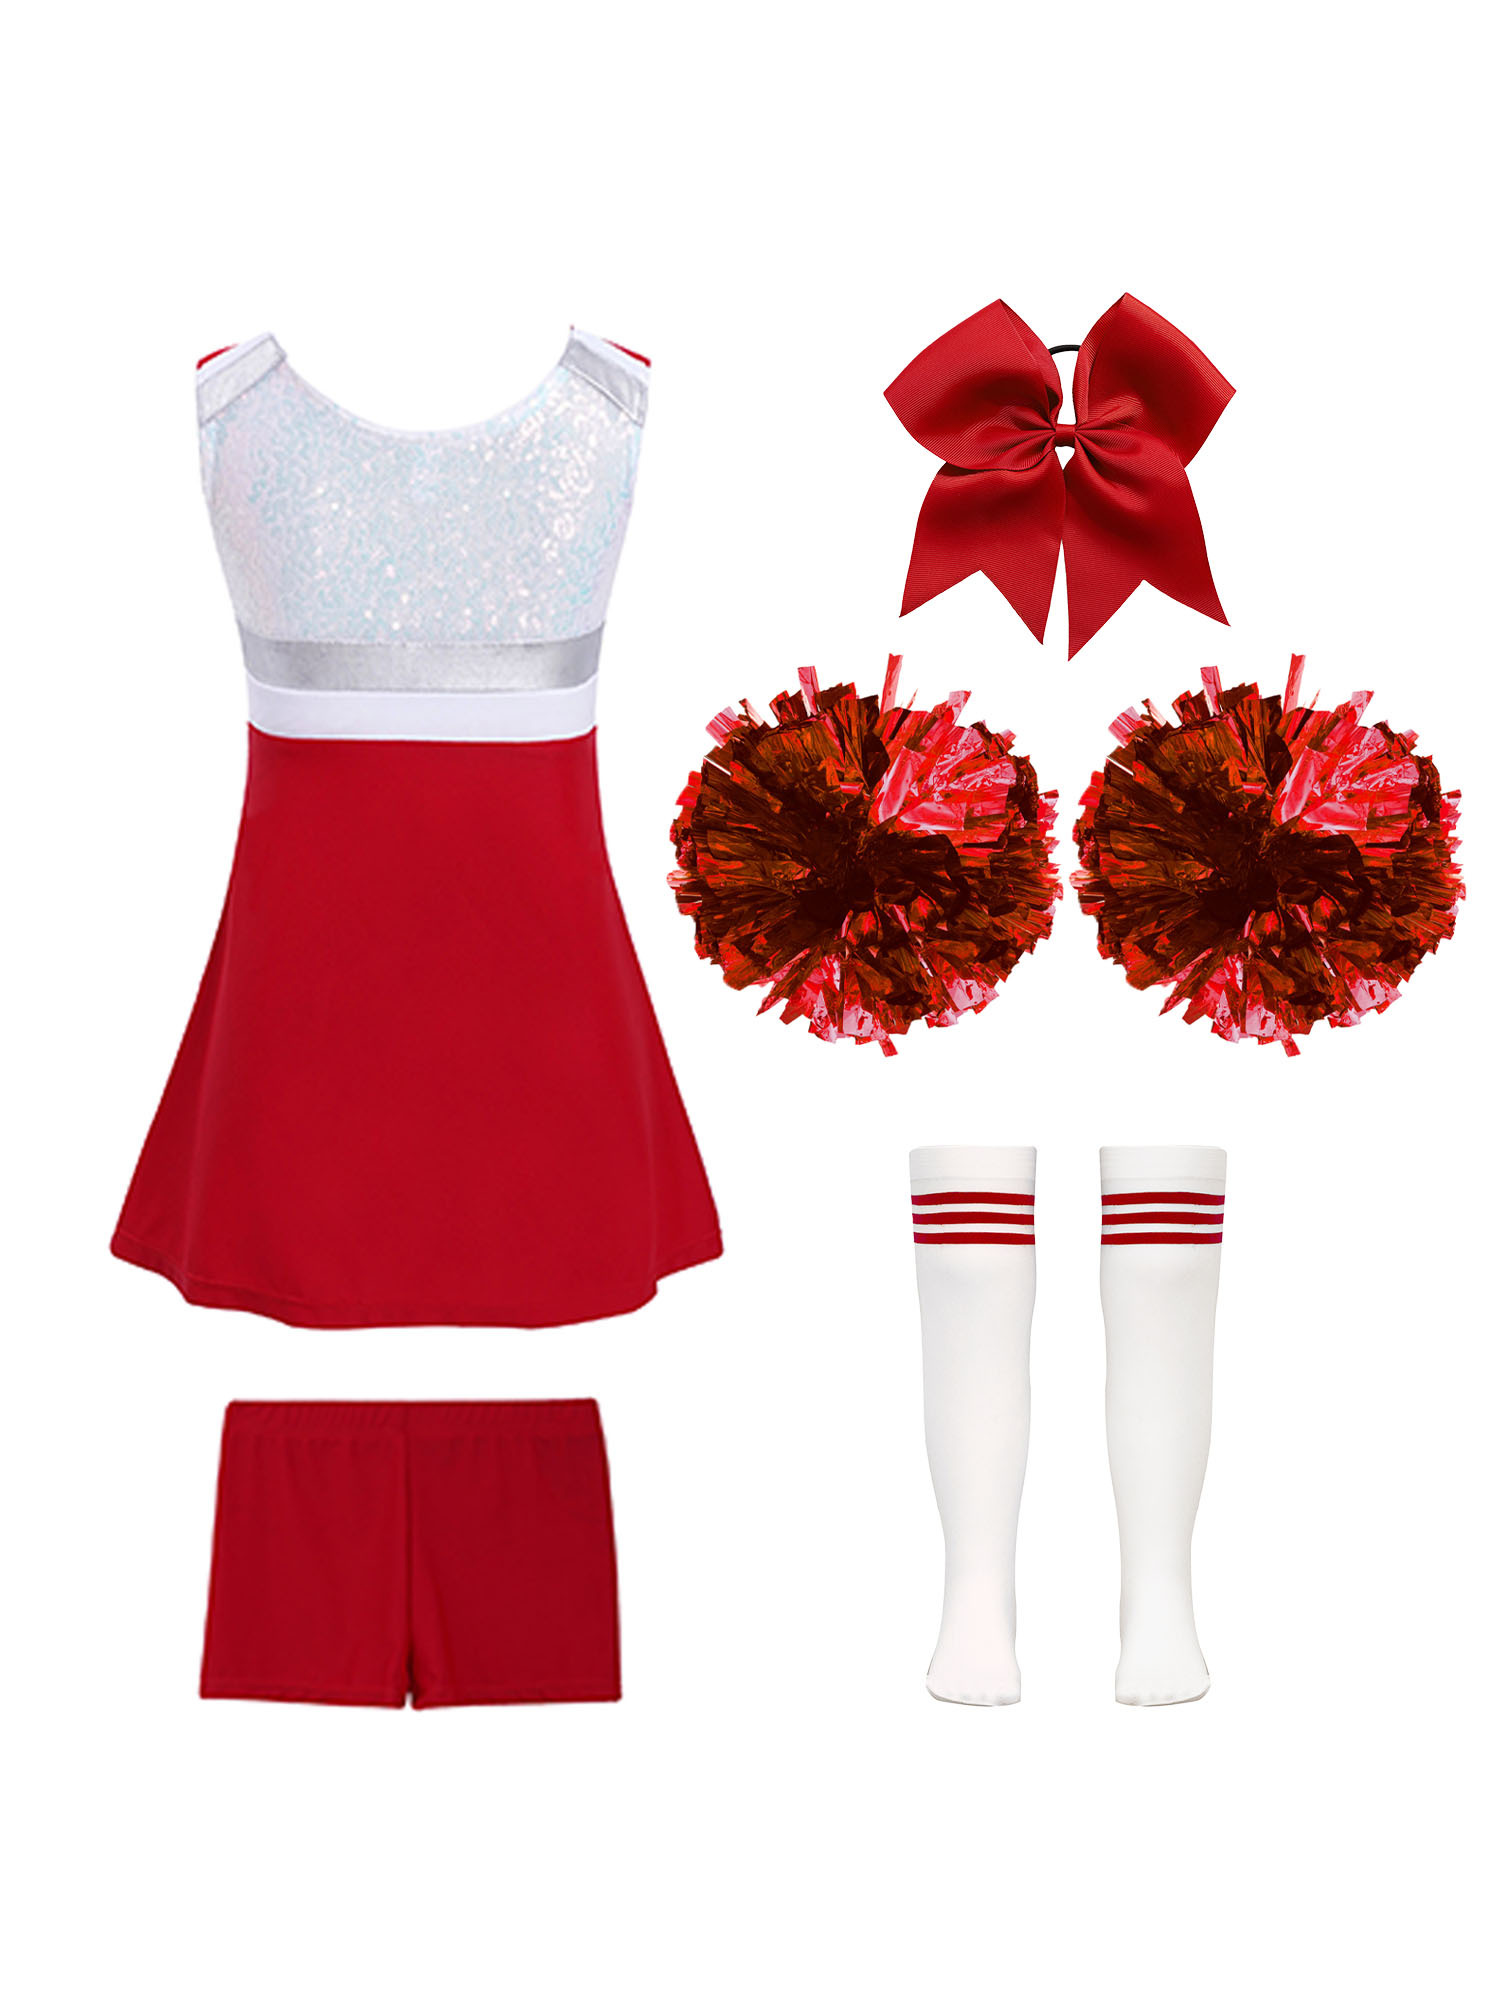 TiaoBug Kids Girls Cheer Leader Uniform Sports Games Cheerleading Dance Outfits Halloween Carnival Fancy Dress Up A Red 12 - image 2 of 5